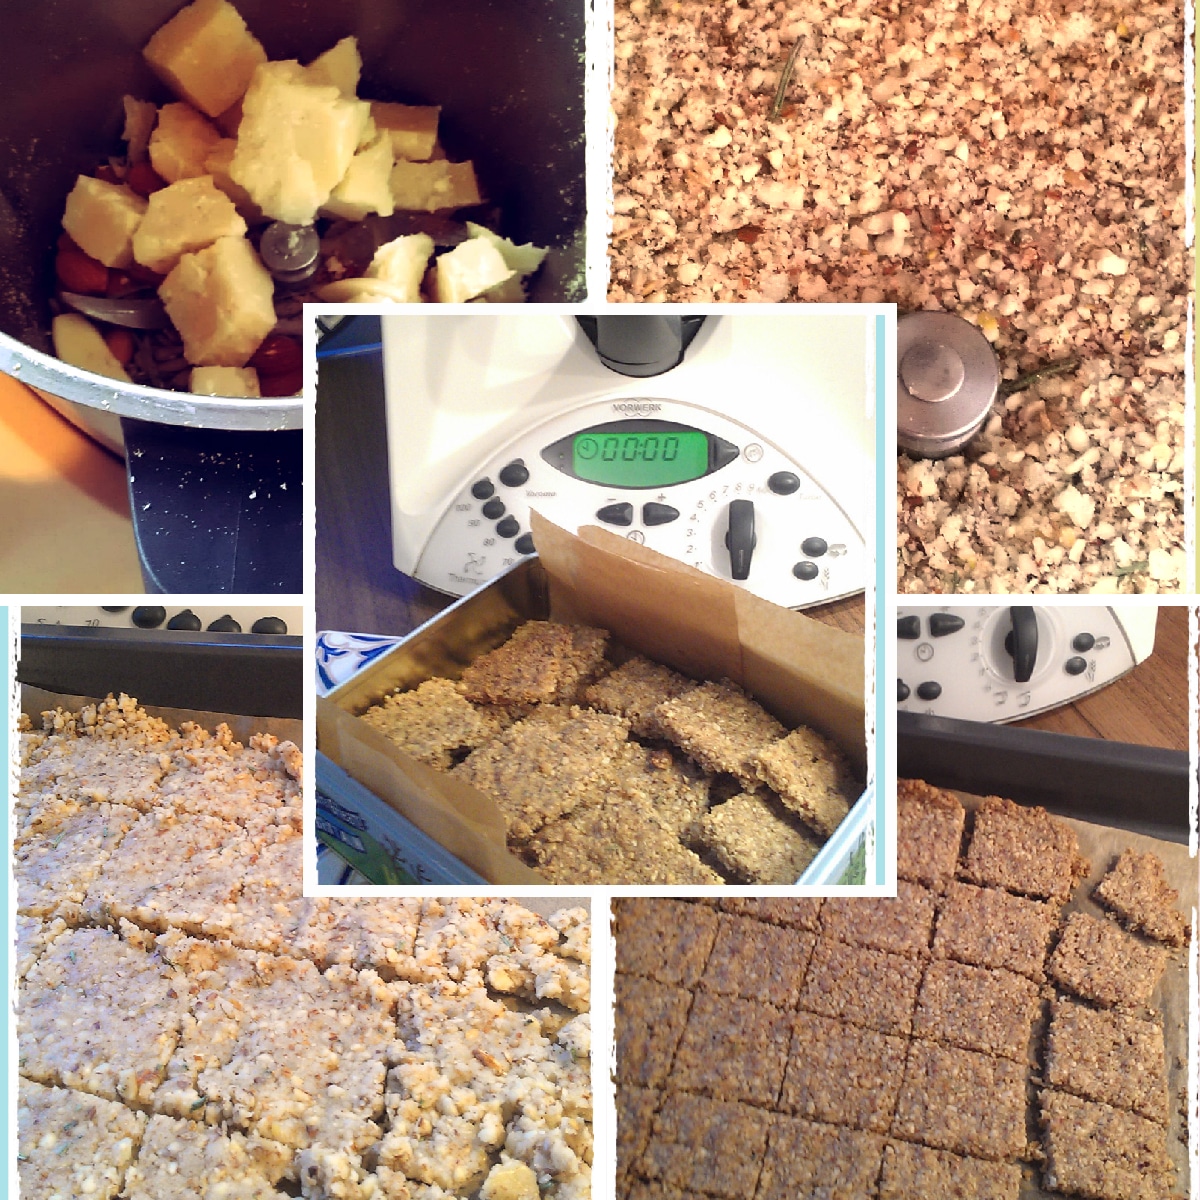 Nutty About Nuts and Seeds: Bernie Brennan’s Almond and Seed Crackers